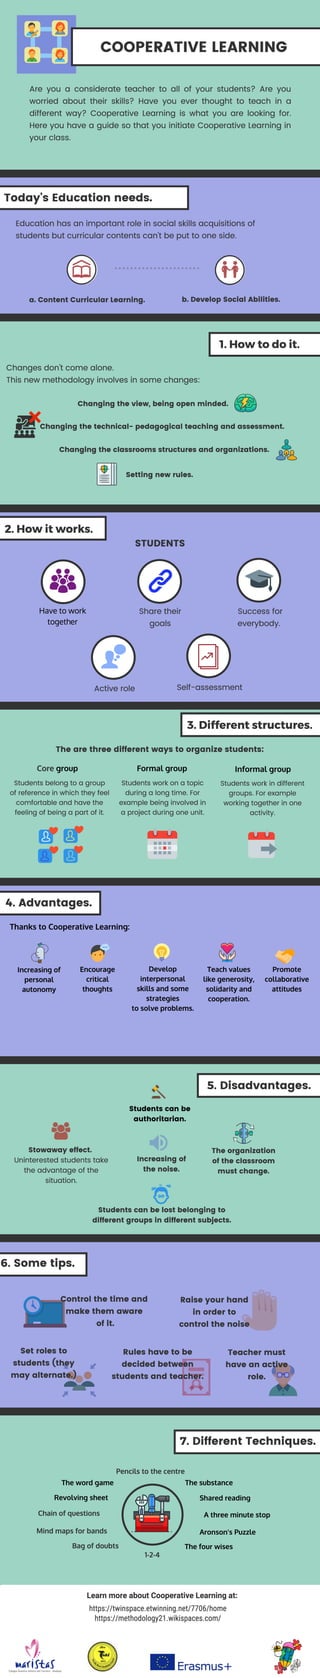 Cooperative Learning Infographic